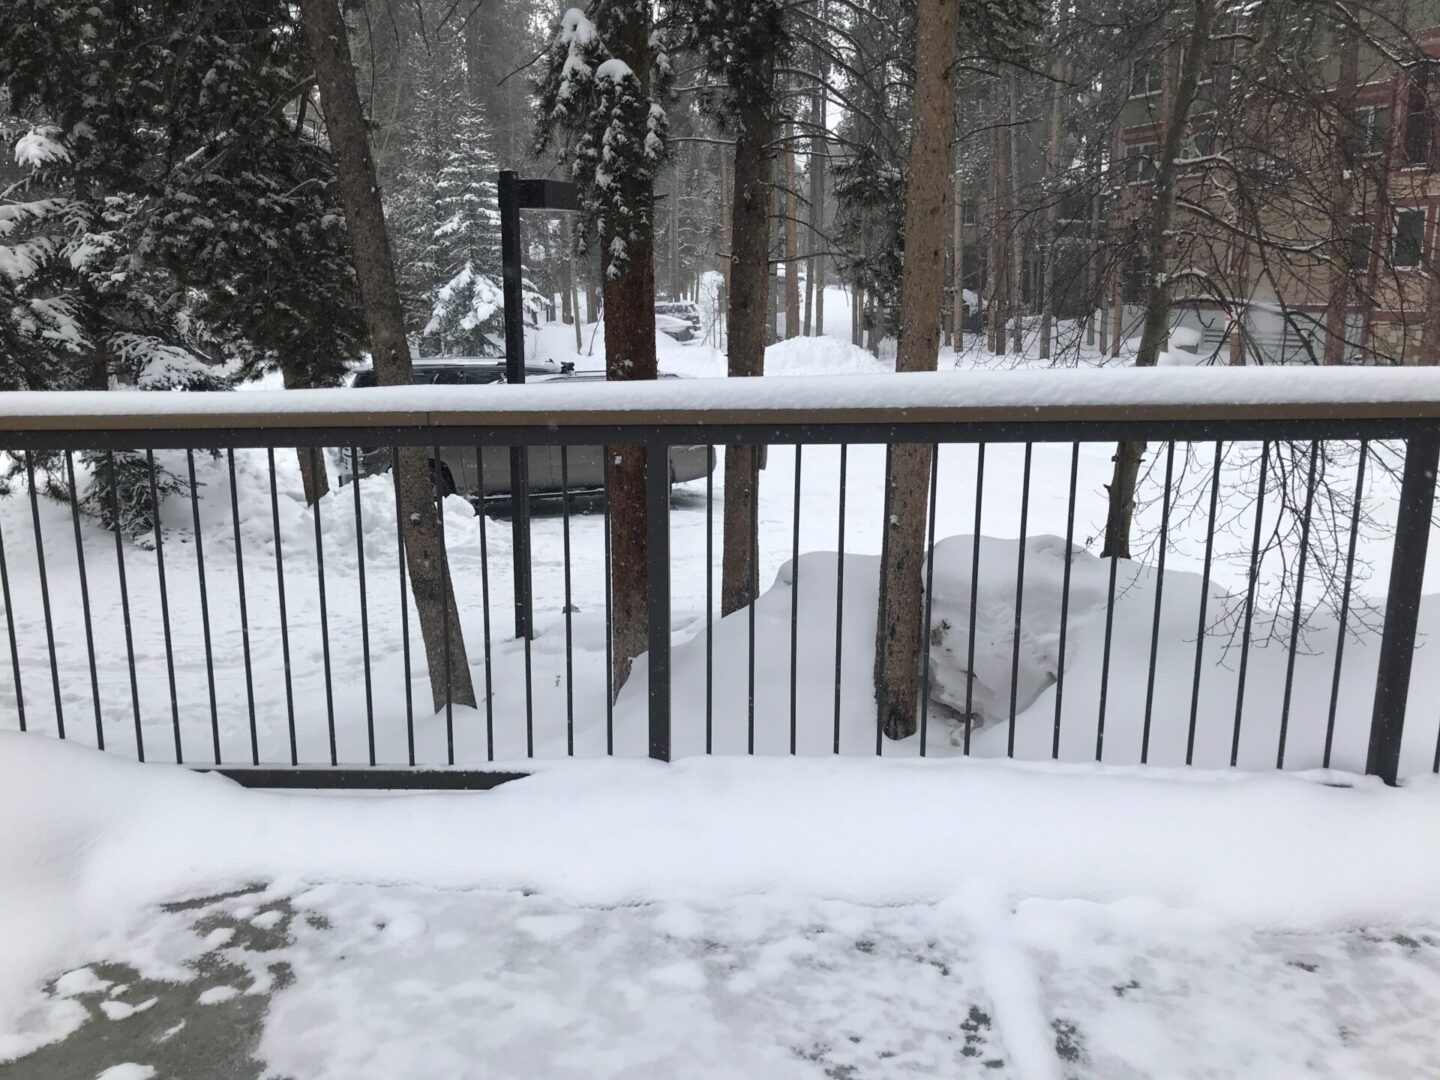 A fence in the snow near some trees